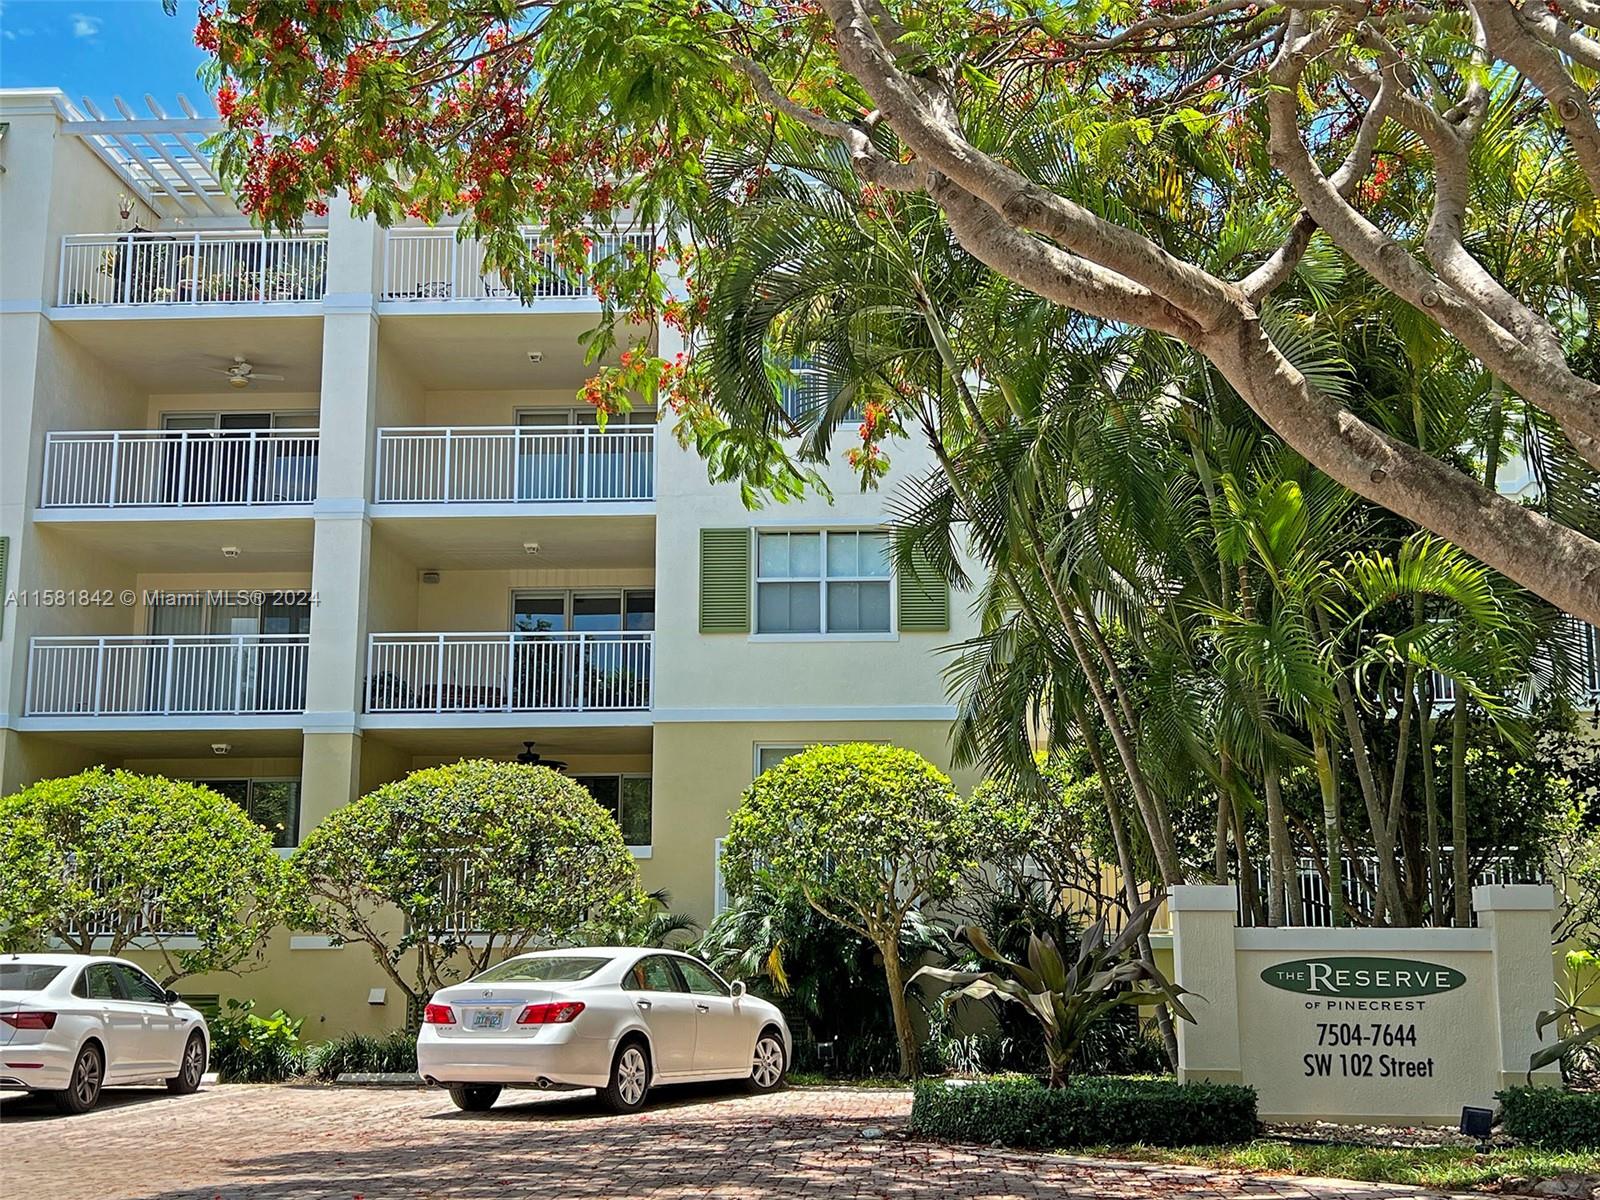 7598 Sw 102nd St St 300, Pinecrest, Miami-Dade County, Florida - 3 Bedrooms  
3 Bathrooms - 